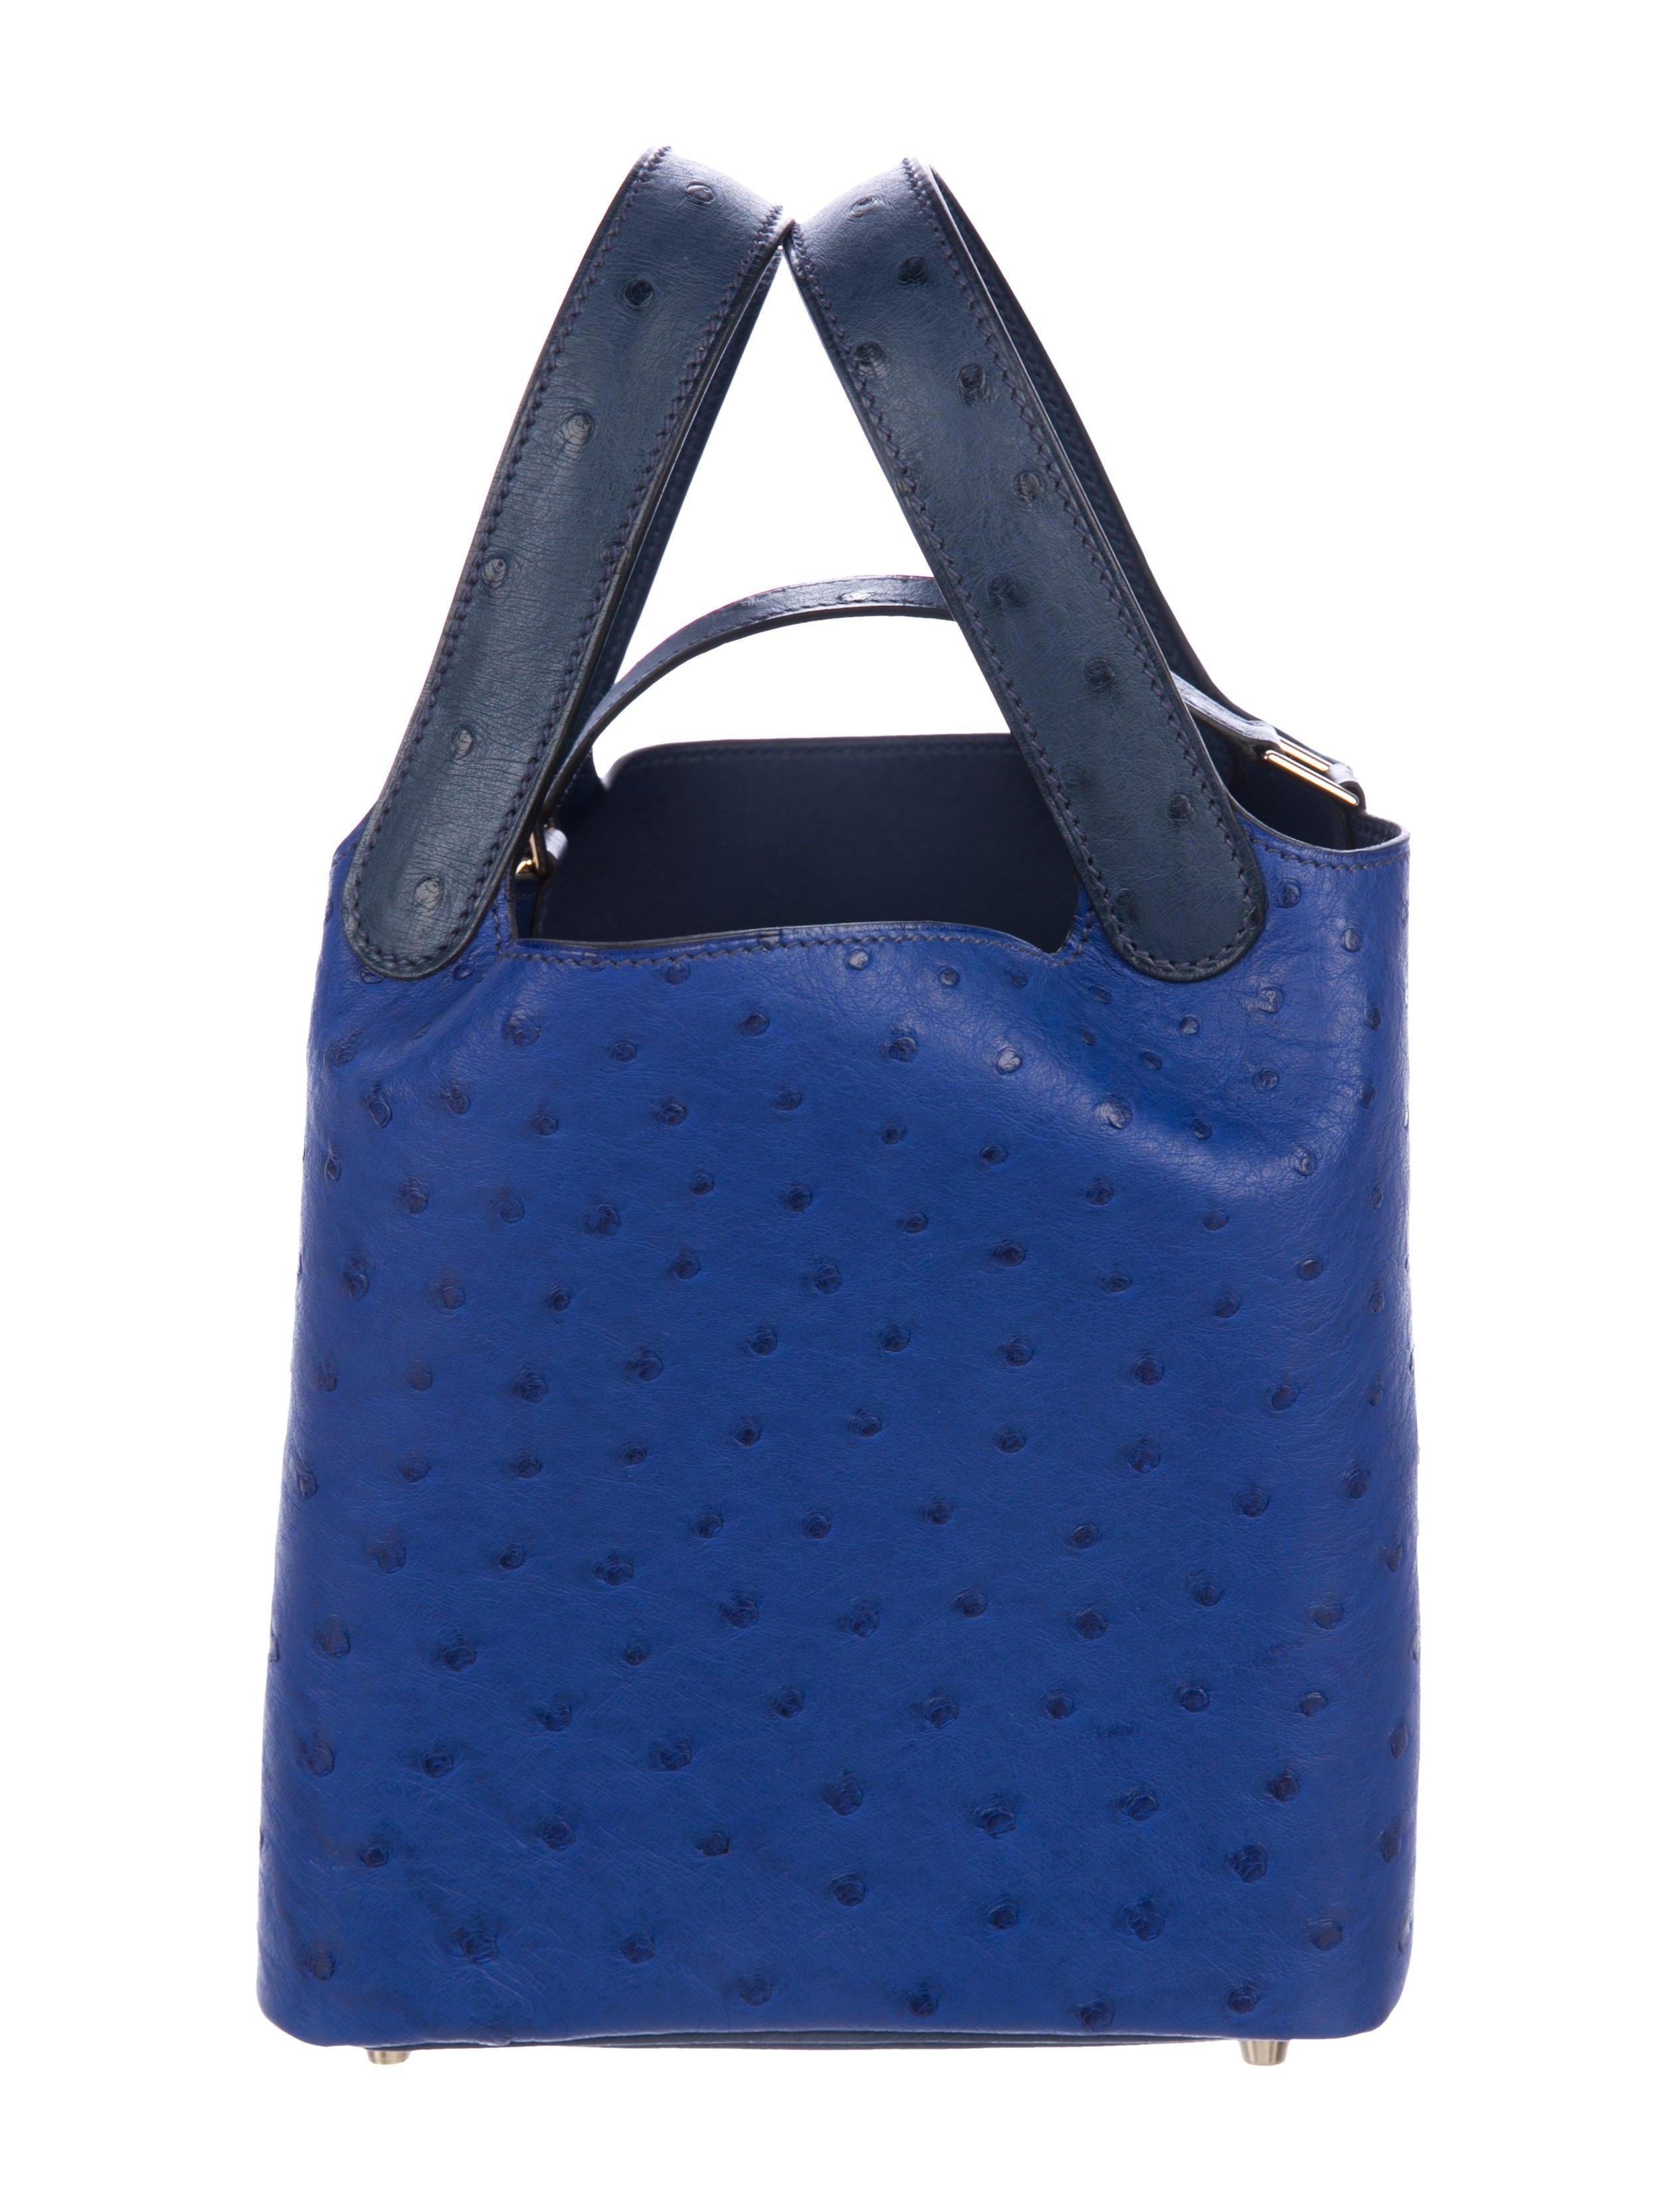 Hermes Leather Two Tone Blue Lock Evening Small Tote Top Handle Bucket Satchel Bag in Box

Ostrich
Leather
Palladium plated hardware
Leather lining 
Pull-through closure
Date code present
Handle drop 5.5